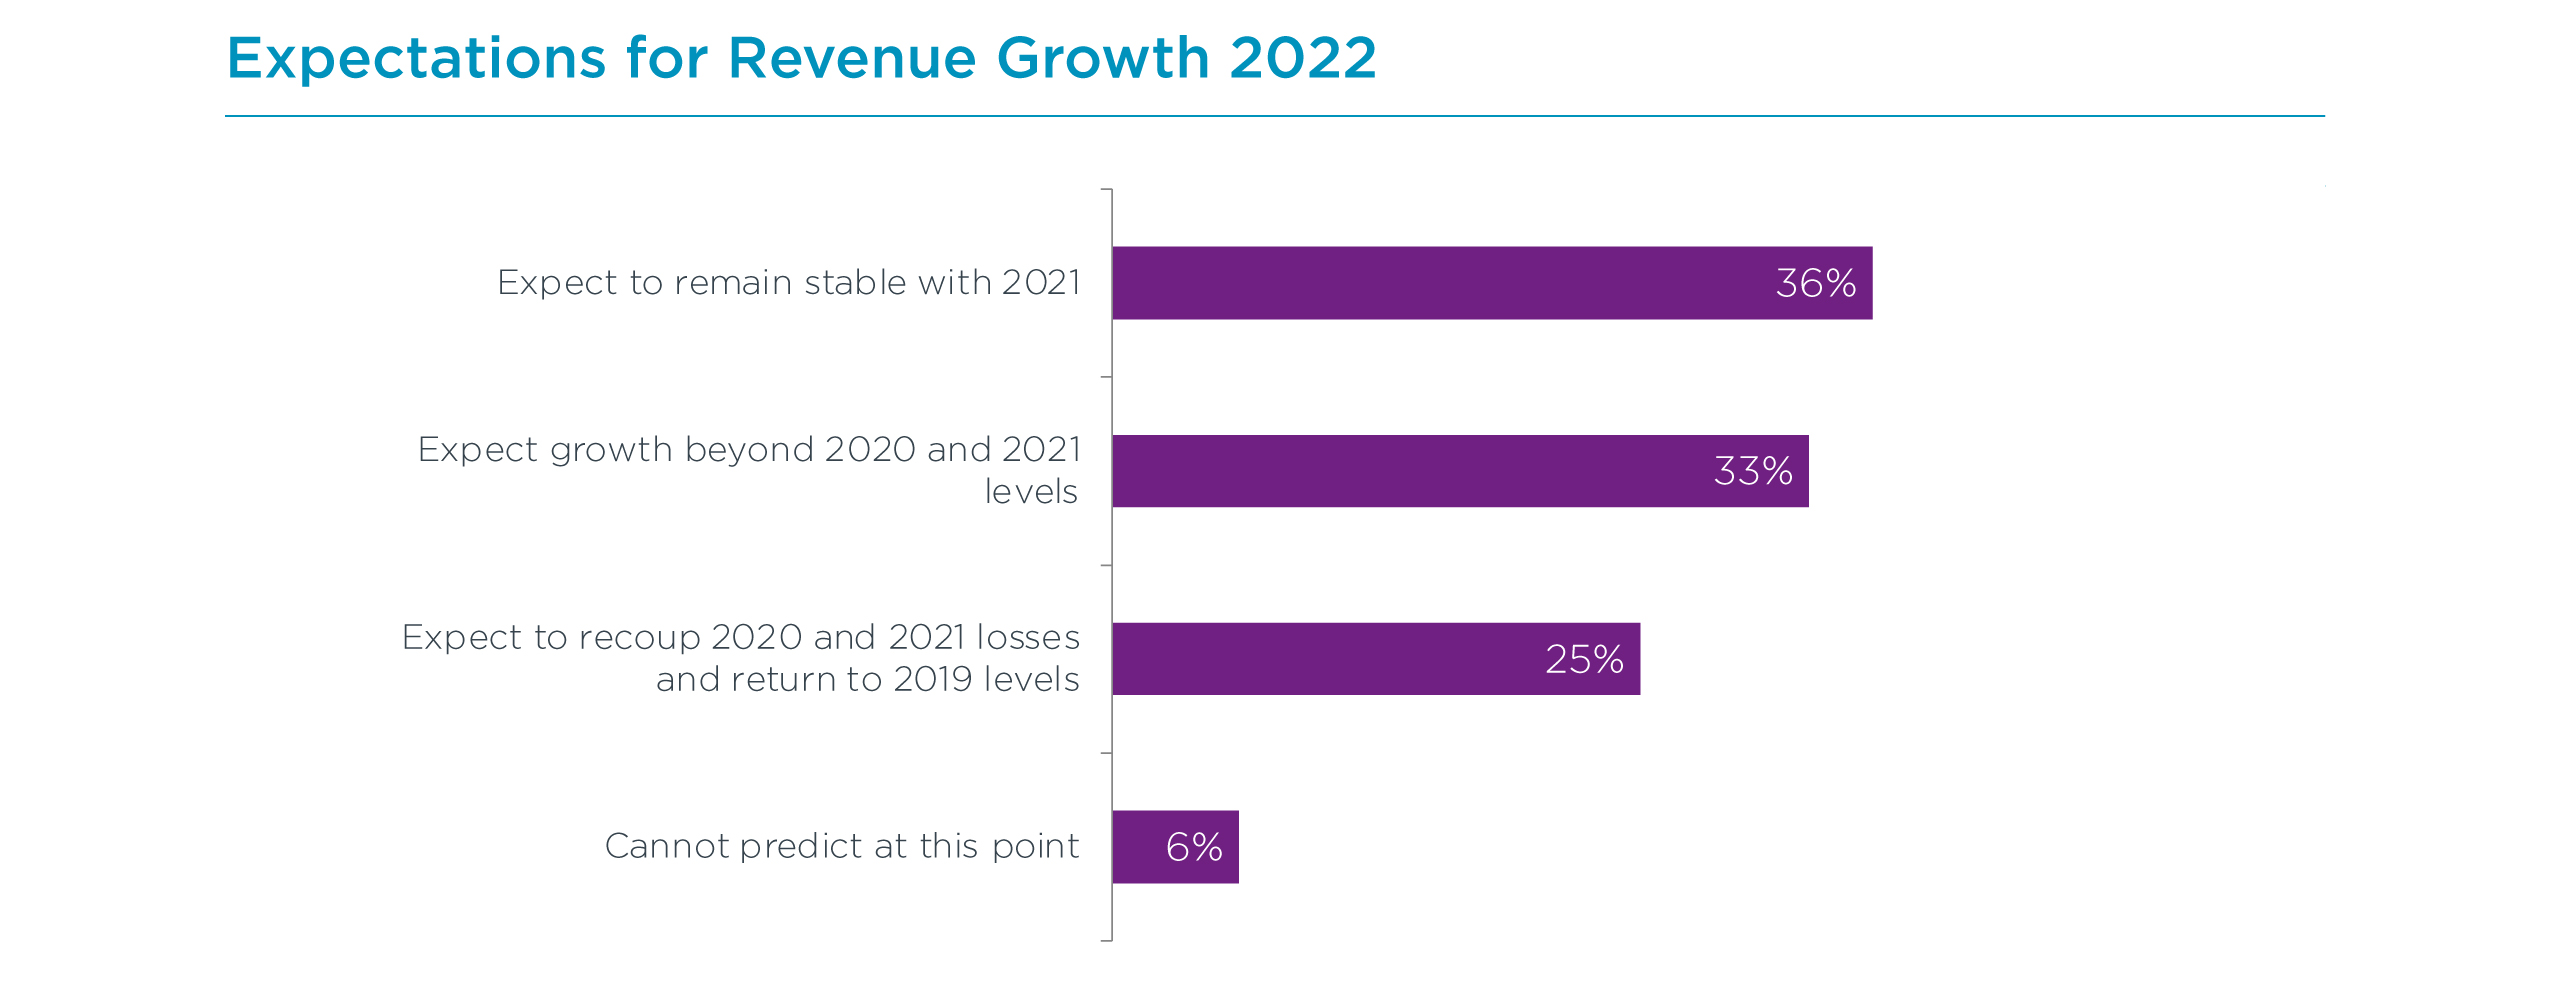 Expectations for Revenue Growth 2022